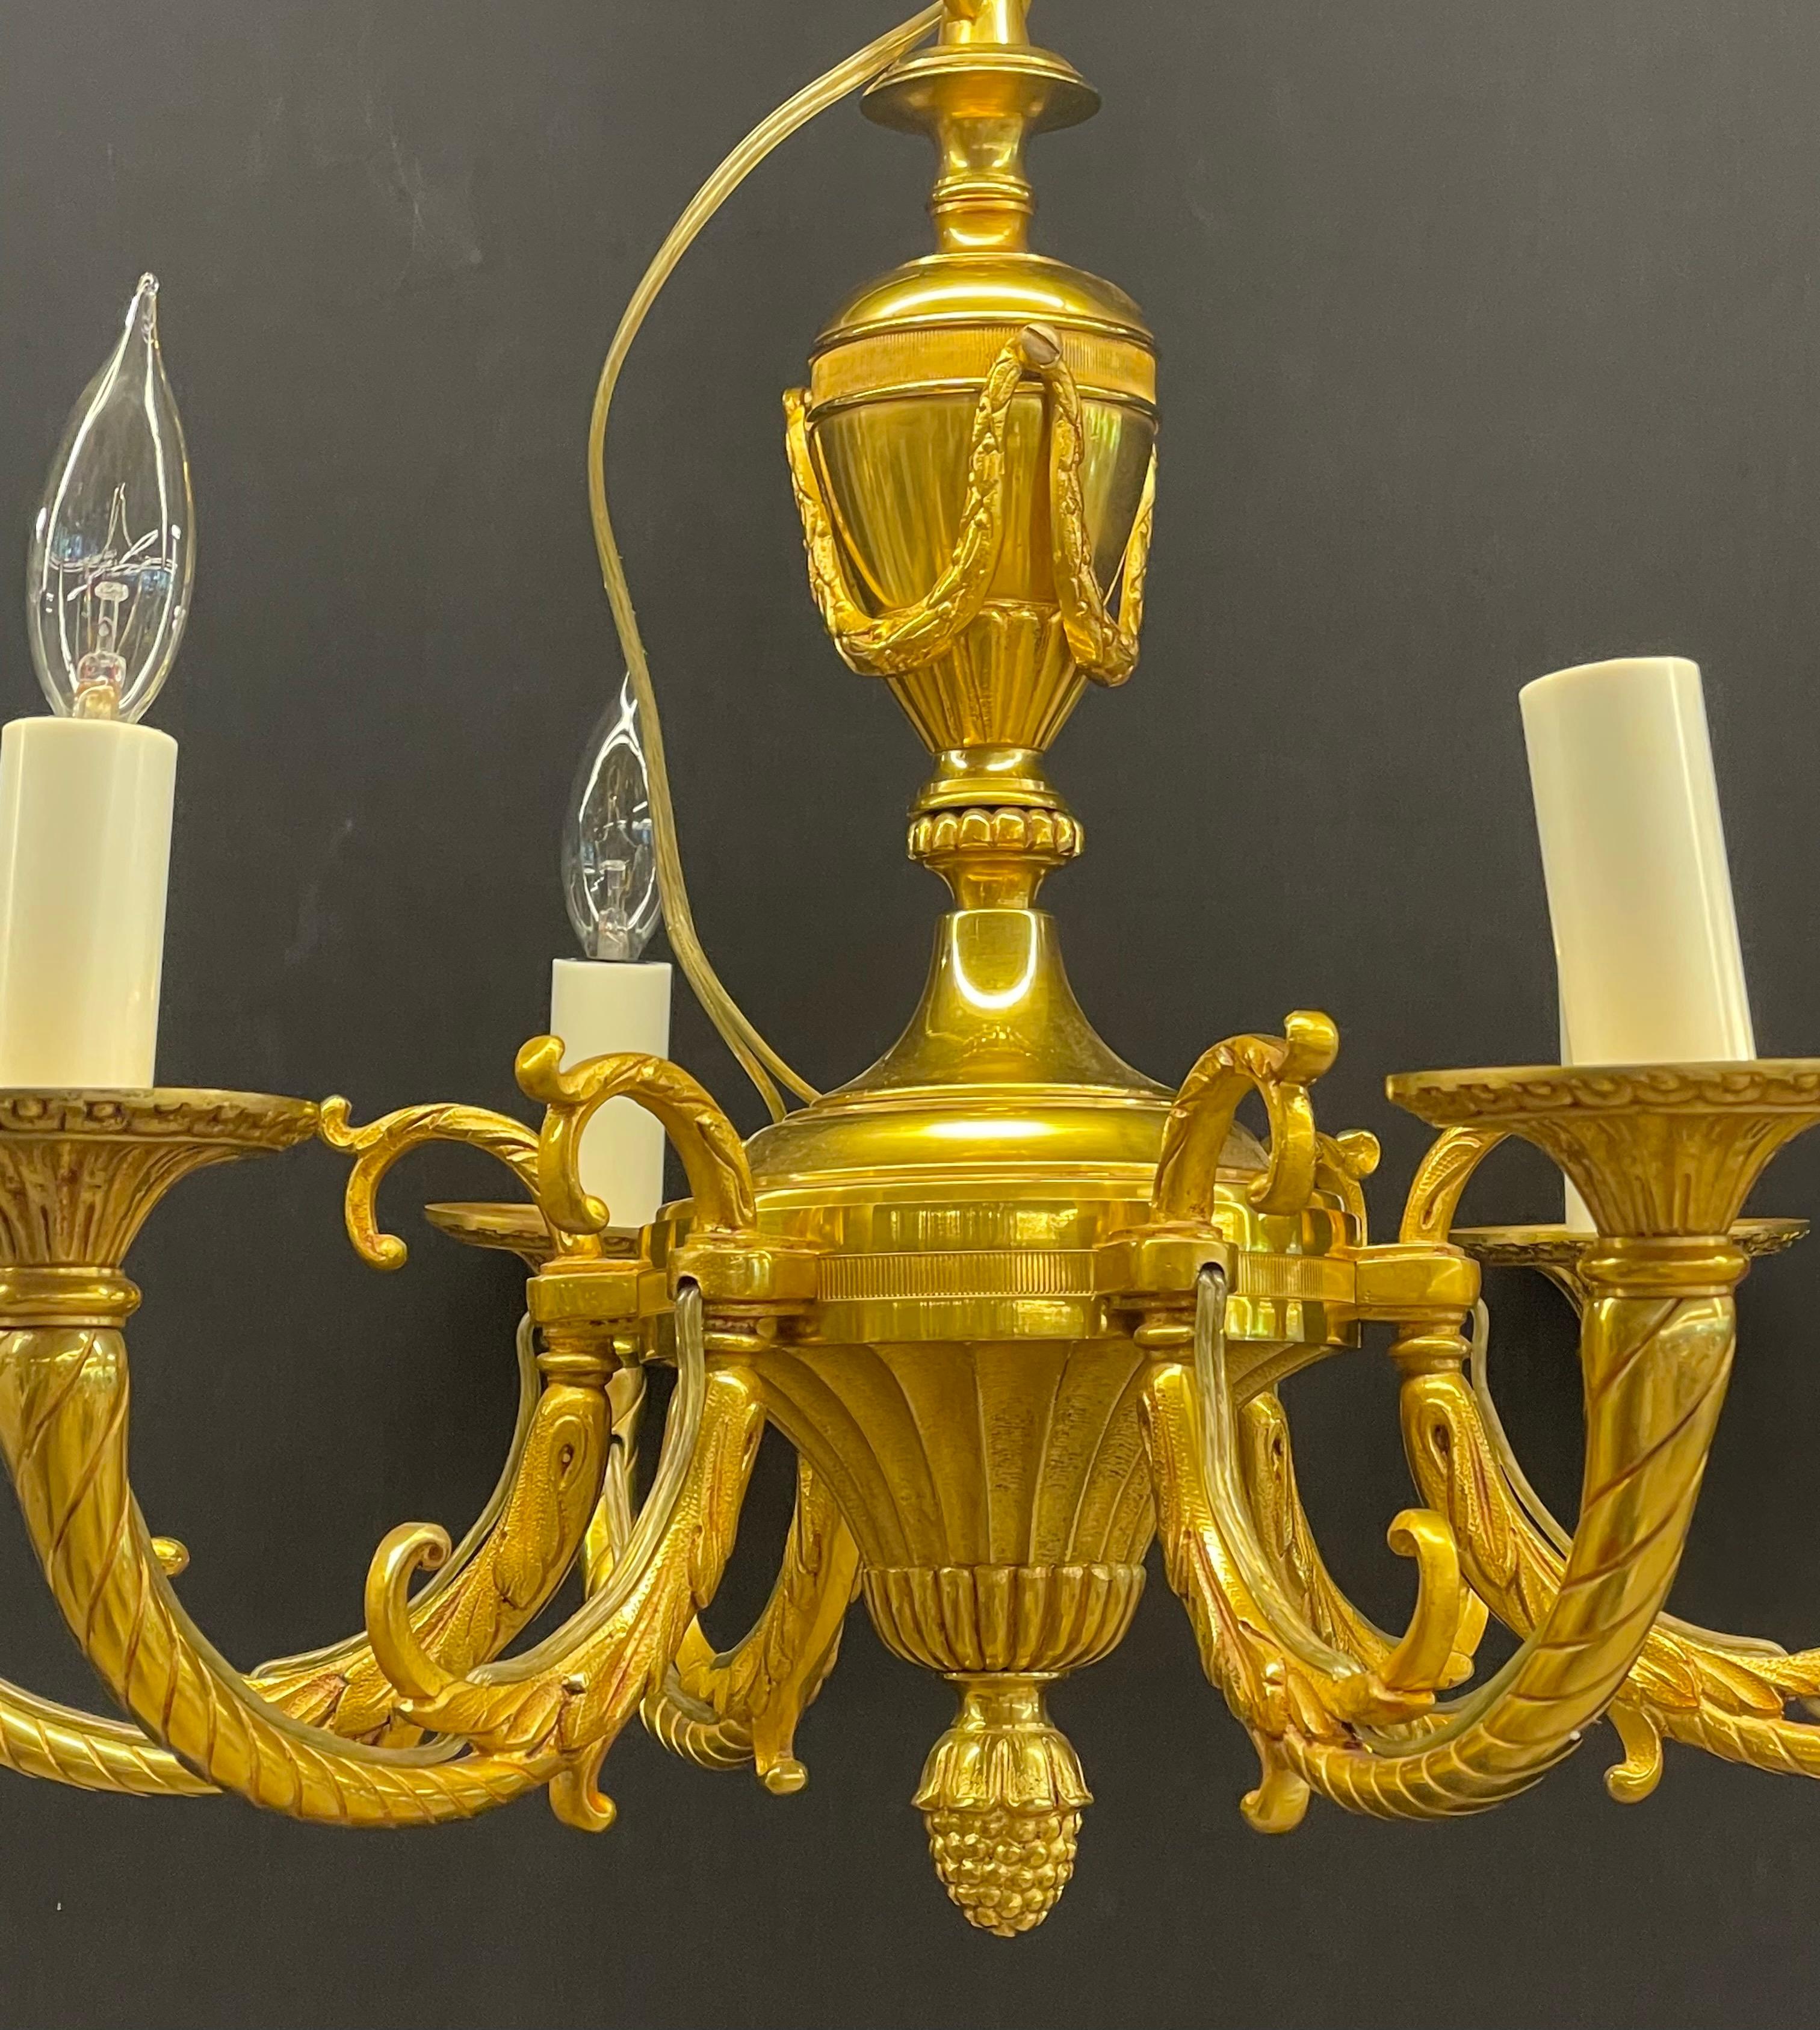 A simply stunning finely cast dore bronze chandelier. This diminutive chandelier has six lights and a continuous flow of swag and laurel bronze features.